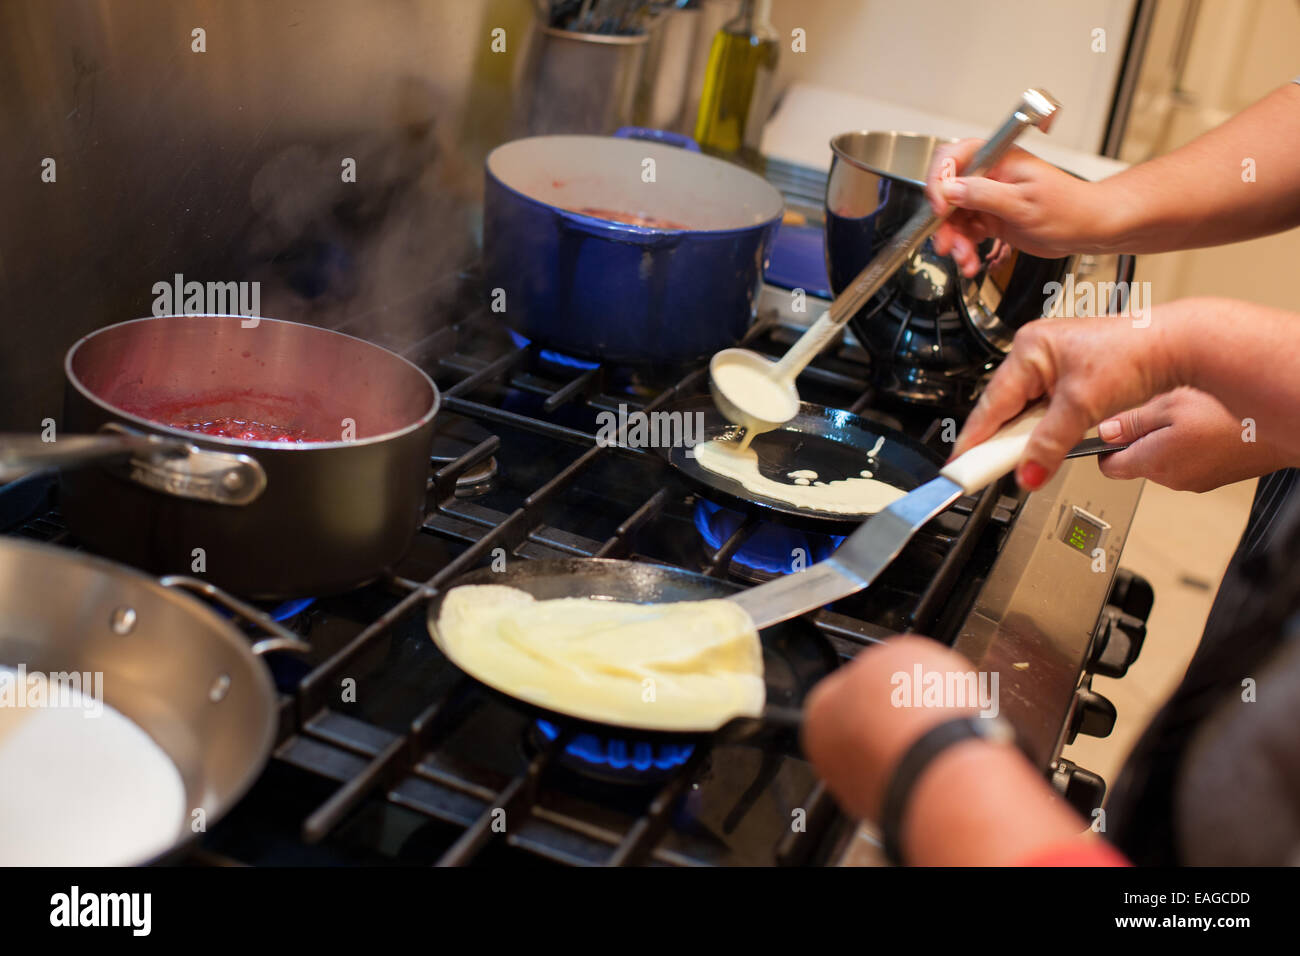 Two people making crepes on the stove Stock Photo